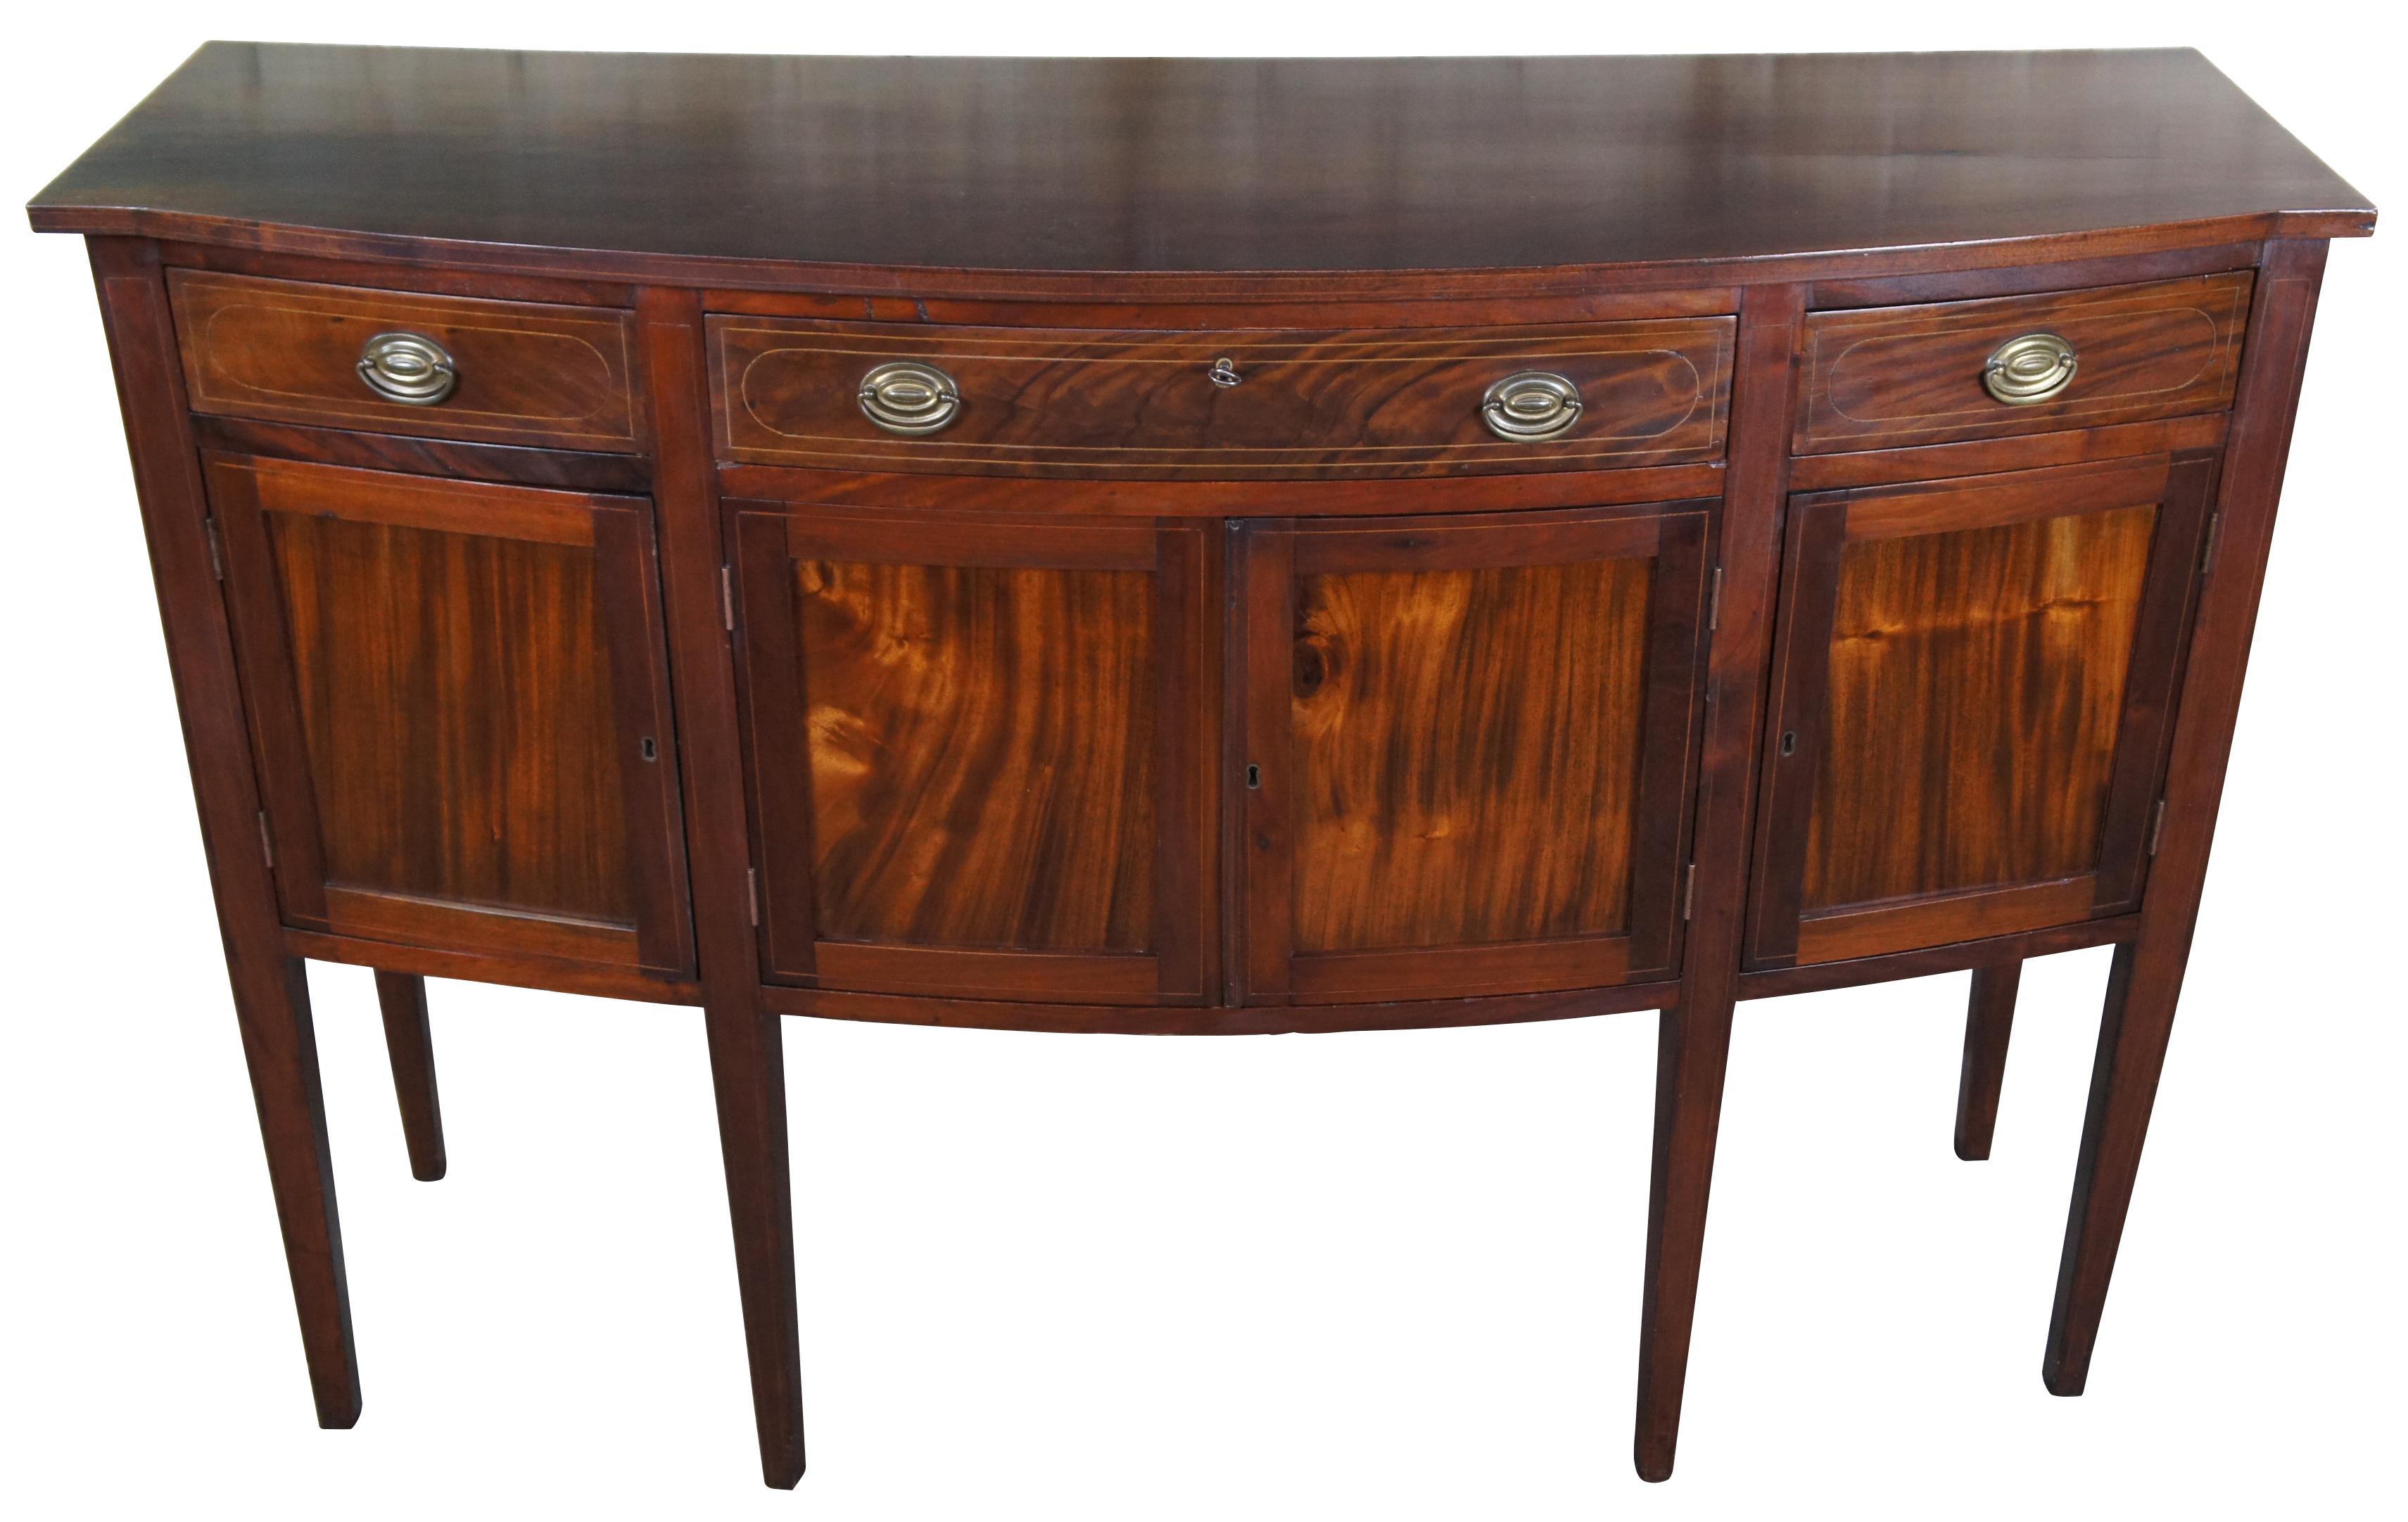 Antique American Sheraton buffet, circa first half 19th century. Made of mahogany featuring a bow front of three drawers and lower cabinets with shelf. Includes yew inlay and brass hardware. The cabinet is supported by long square tapered legs.